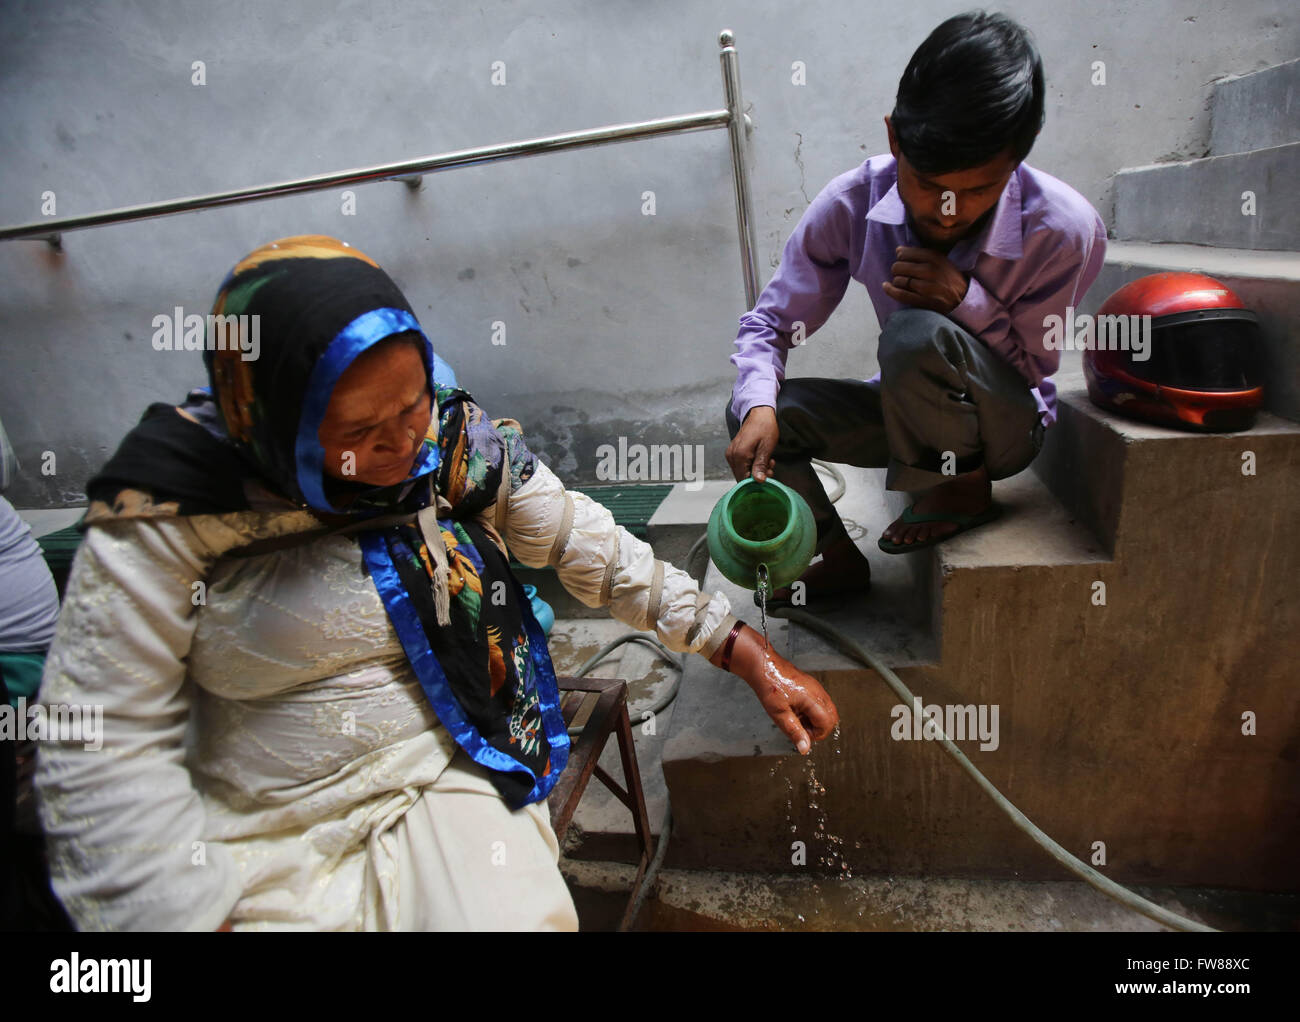 New Delhi, India. 1st April, 2016. A helper washes a hand of a patient after she was made cuts by Mohammad Iqbal, a practitioner locally know as Hakeem in Wazirabad Gaon village in North Delhi, India, April 1, 2016. An Open air clinic 'Rahat Open Surgery' boasts of curing its patients by using old practice of bloodletting. Credit:  Xinhua/Alamy Live News Stock Photo